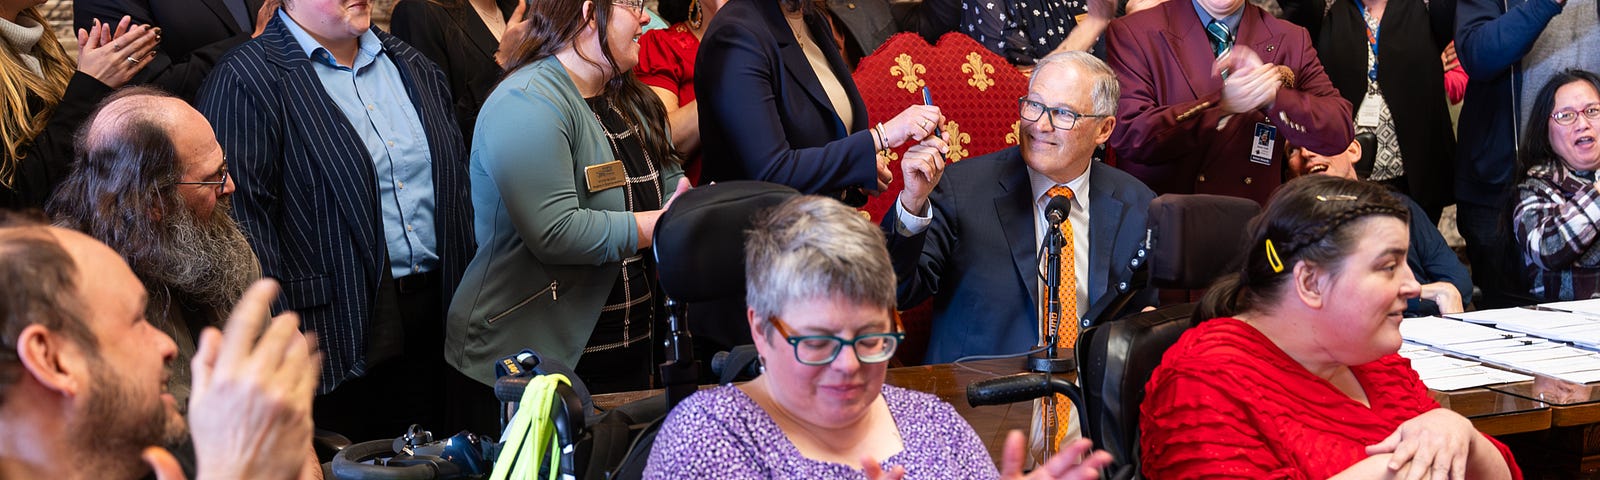 The image shows a bill signing. A group of people surround the governor and the large table at which he sits. The governor is wearing a blue suit with an orange tie and he is sitting in a chair upholstered in crimson and gold fabric. He is handing a pen to the woman on his right. The crowd of people (some of whom are in wheelchairs) are clapping and celebrating.